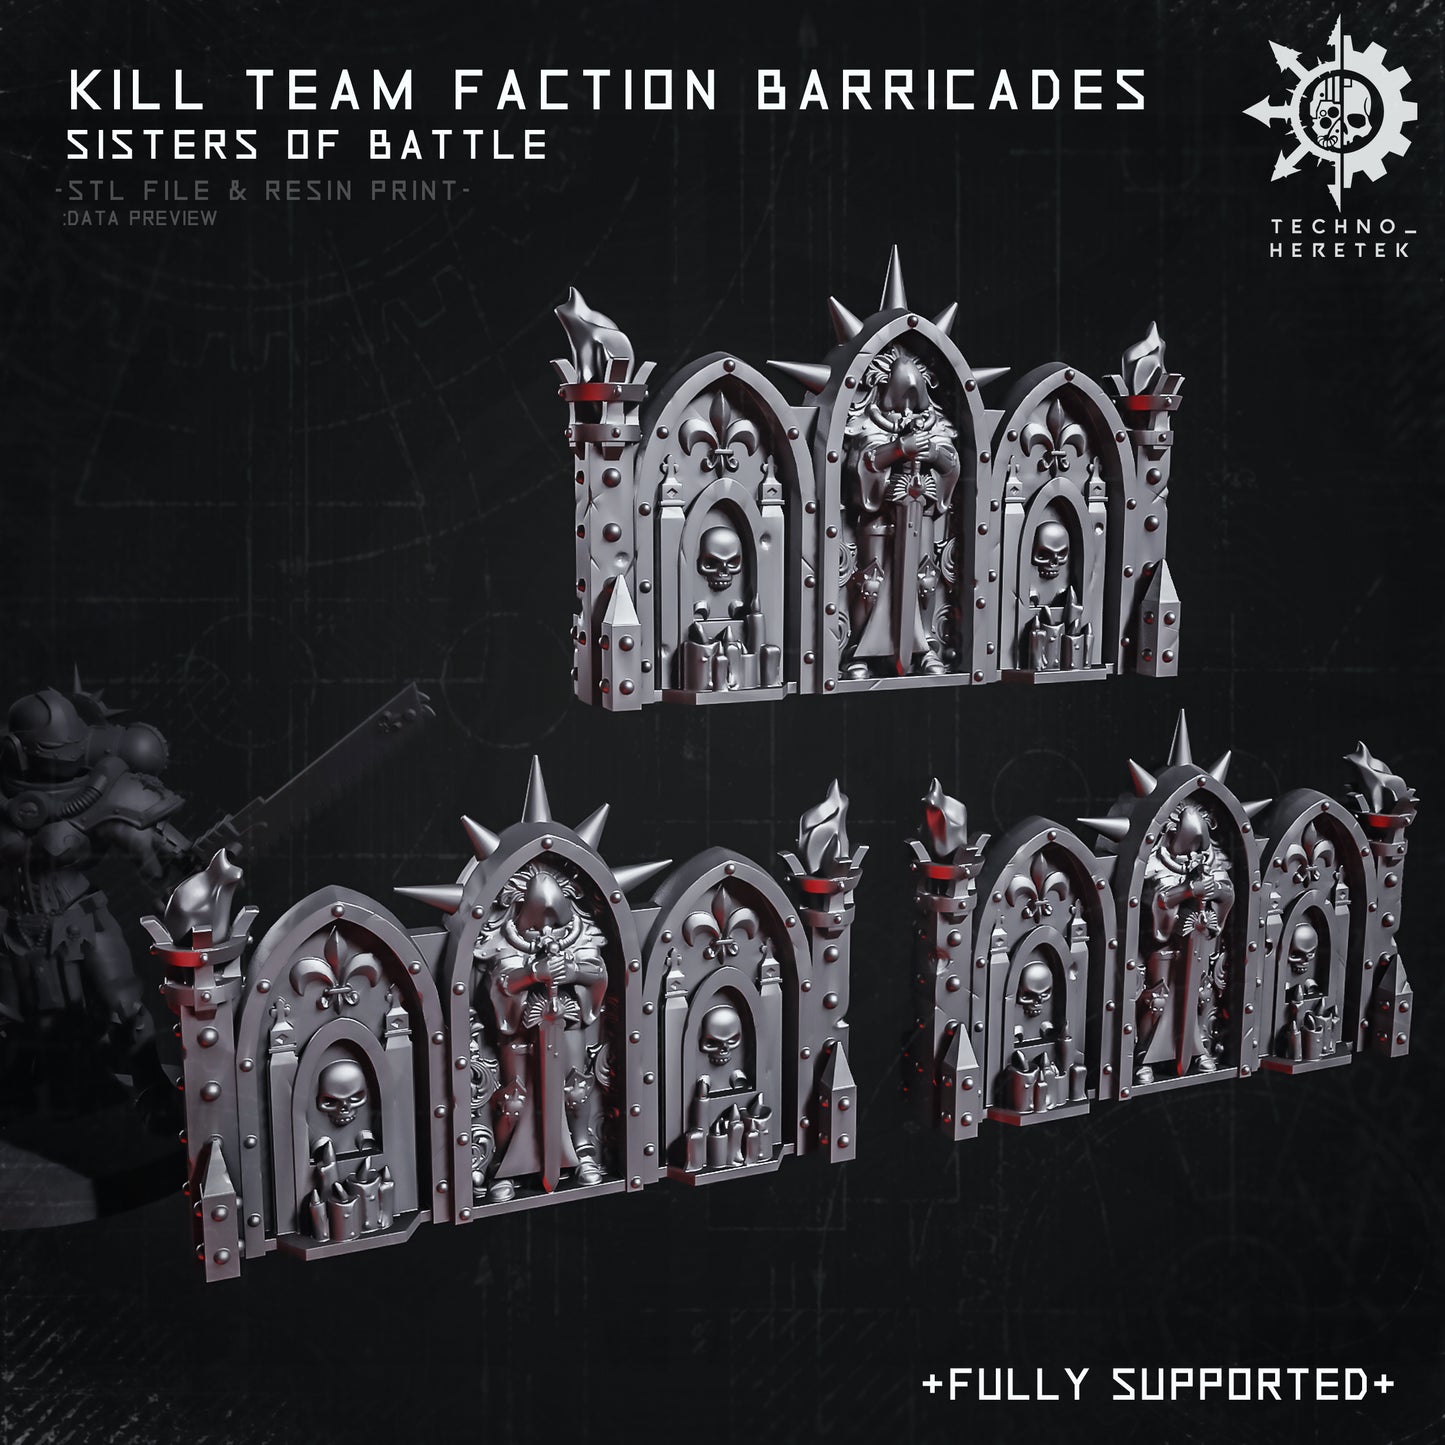 Sisters of Battle Faction Barricades